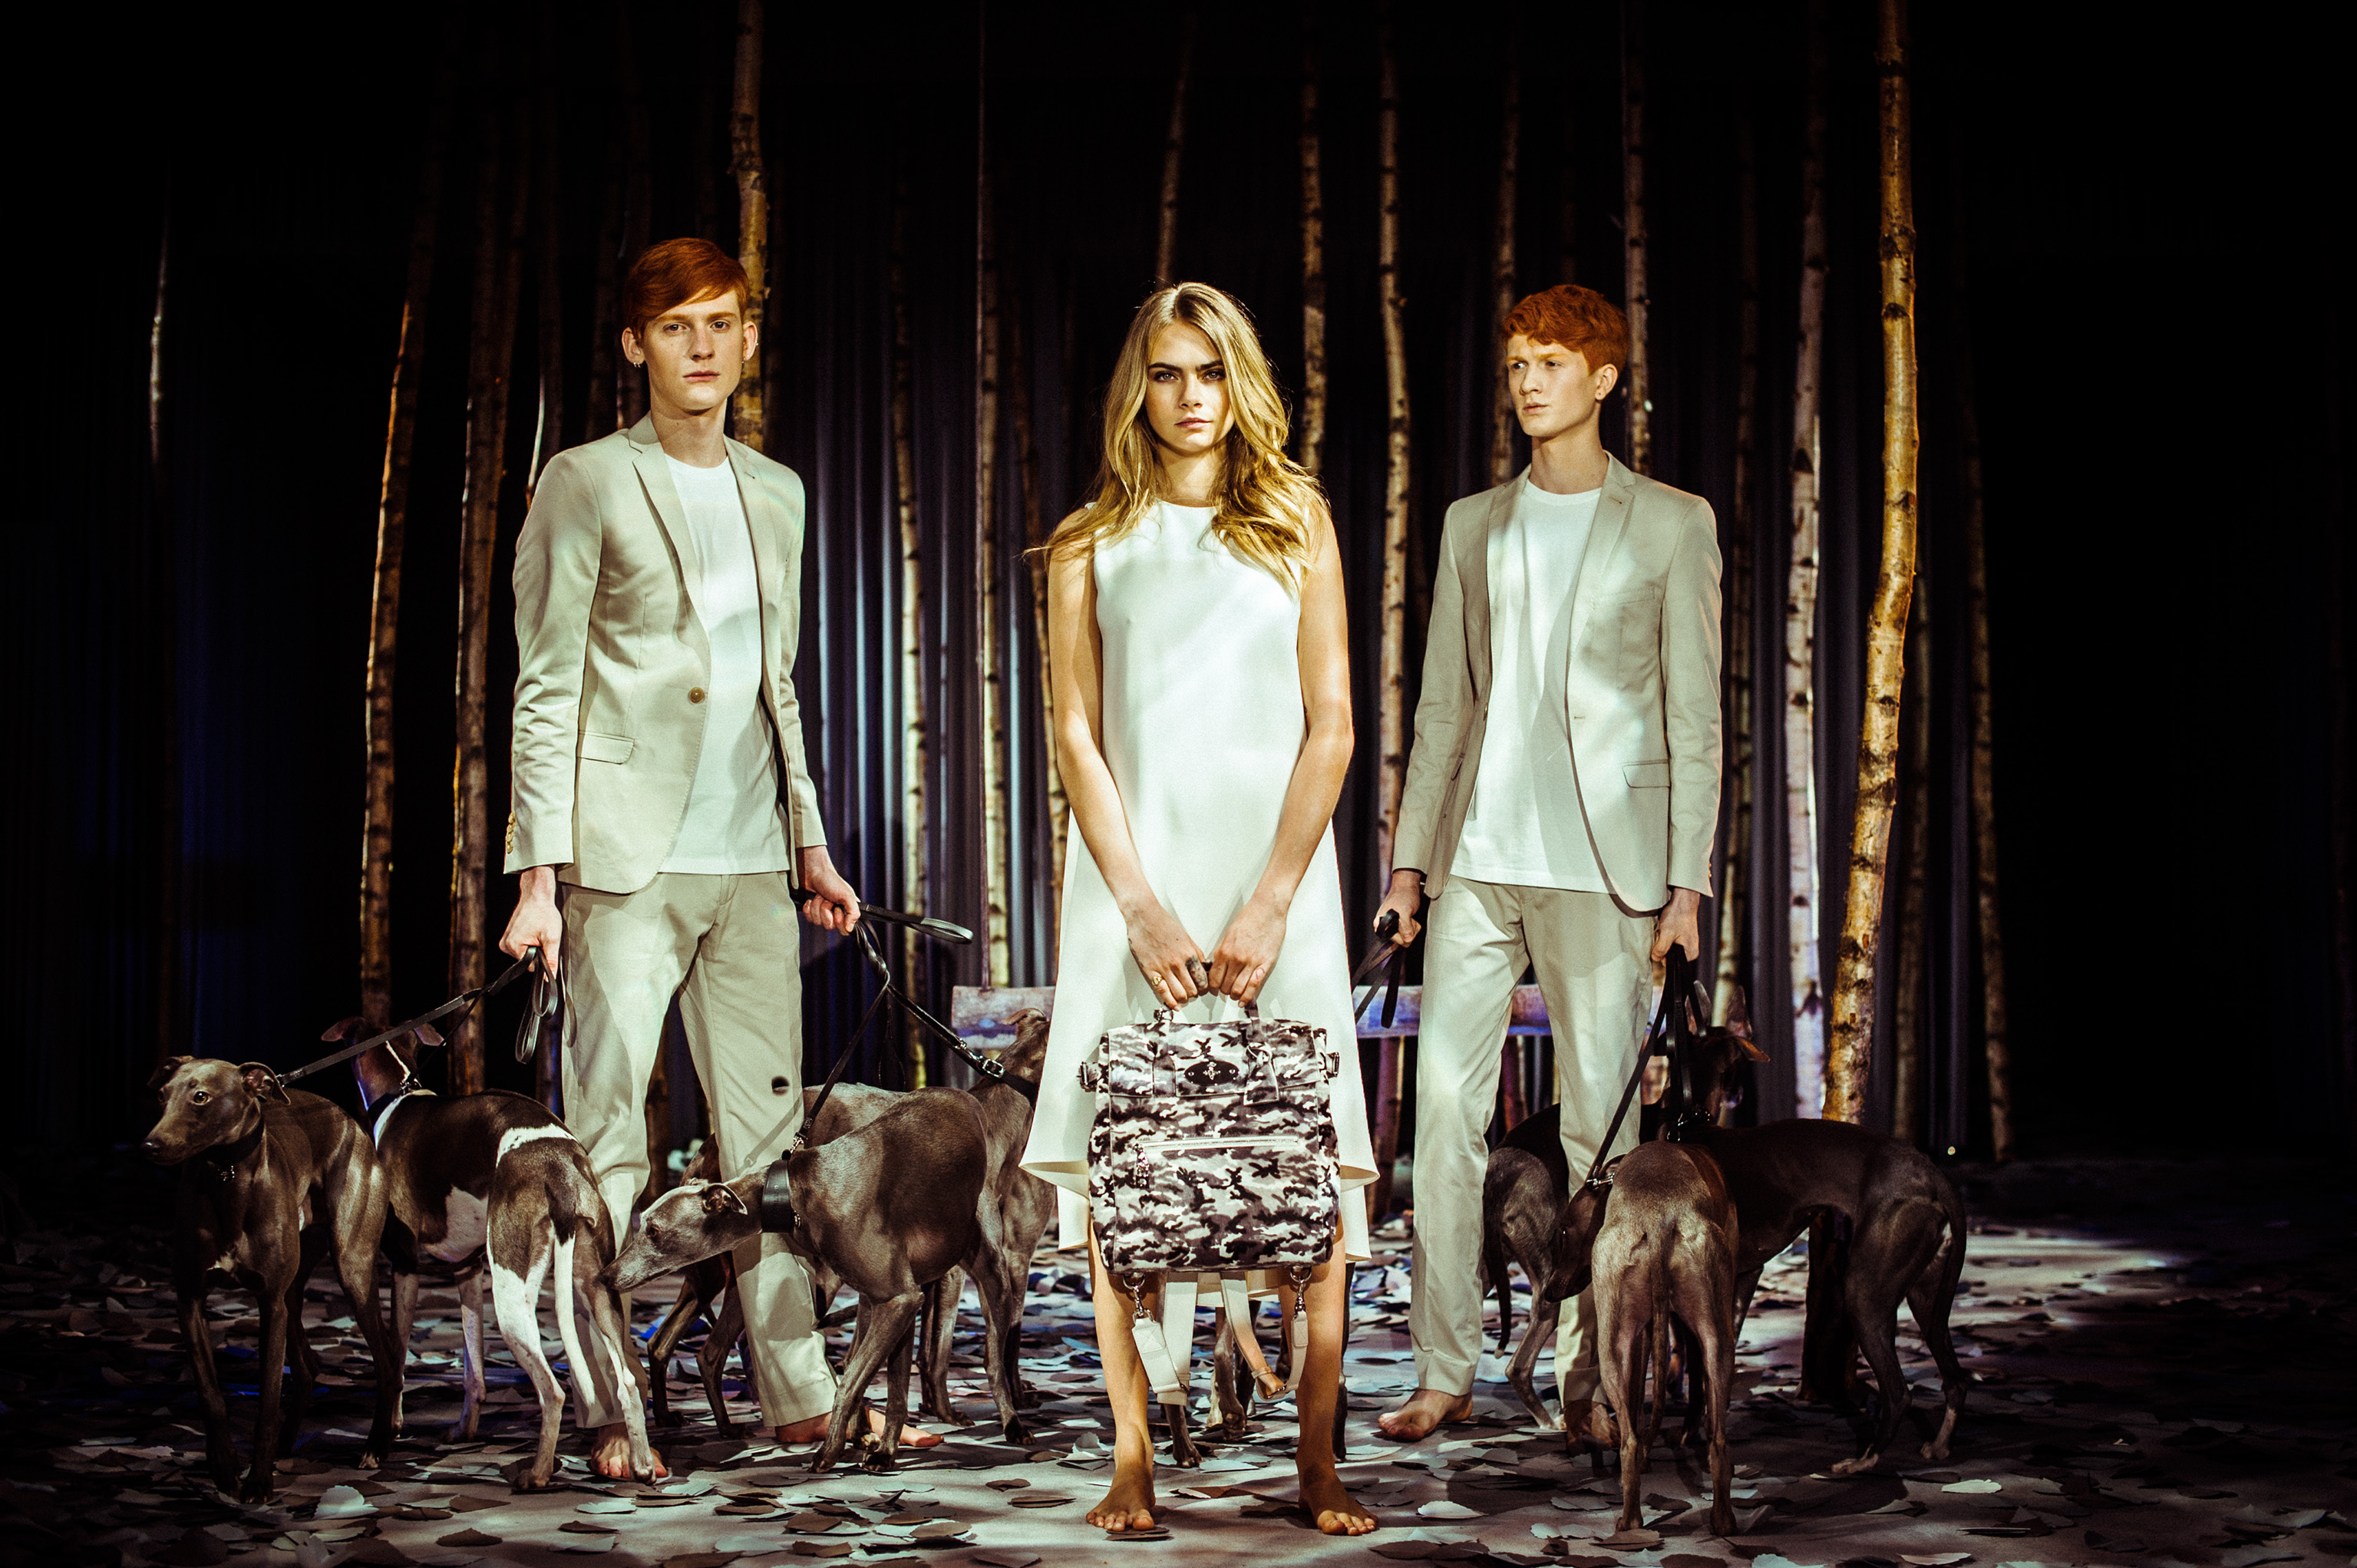 Cara Delevingne For Mulberry AW14 Show, London, 15 Feb 2014, Shot By Morgan O'Donovan For Mulberry